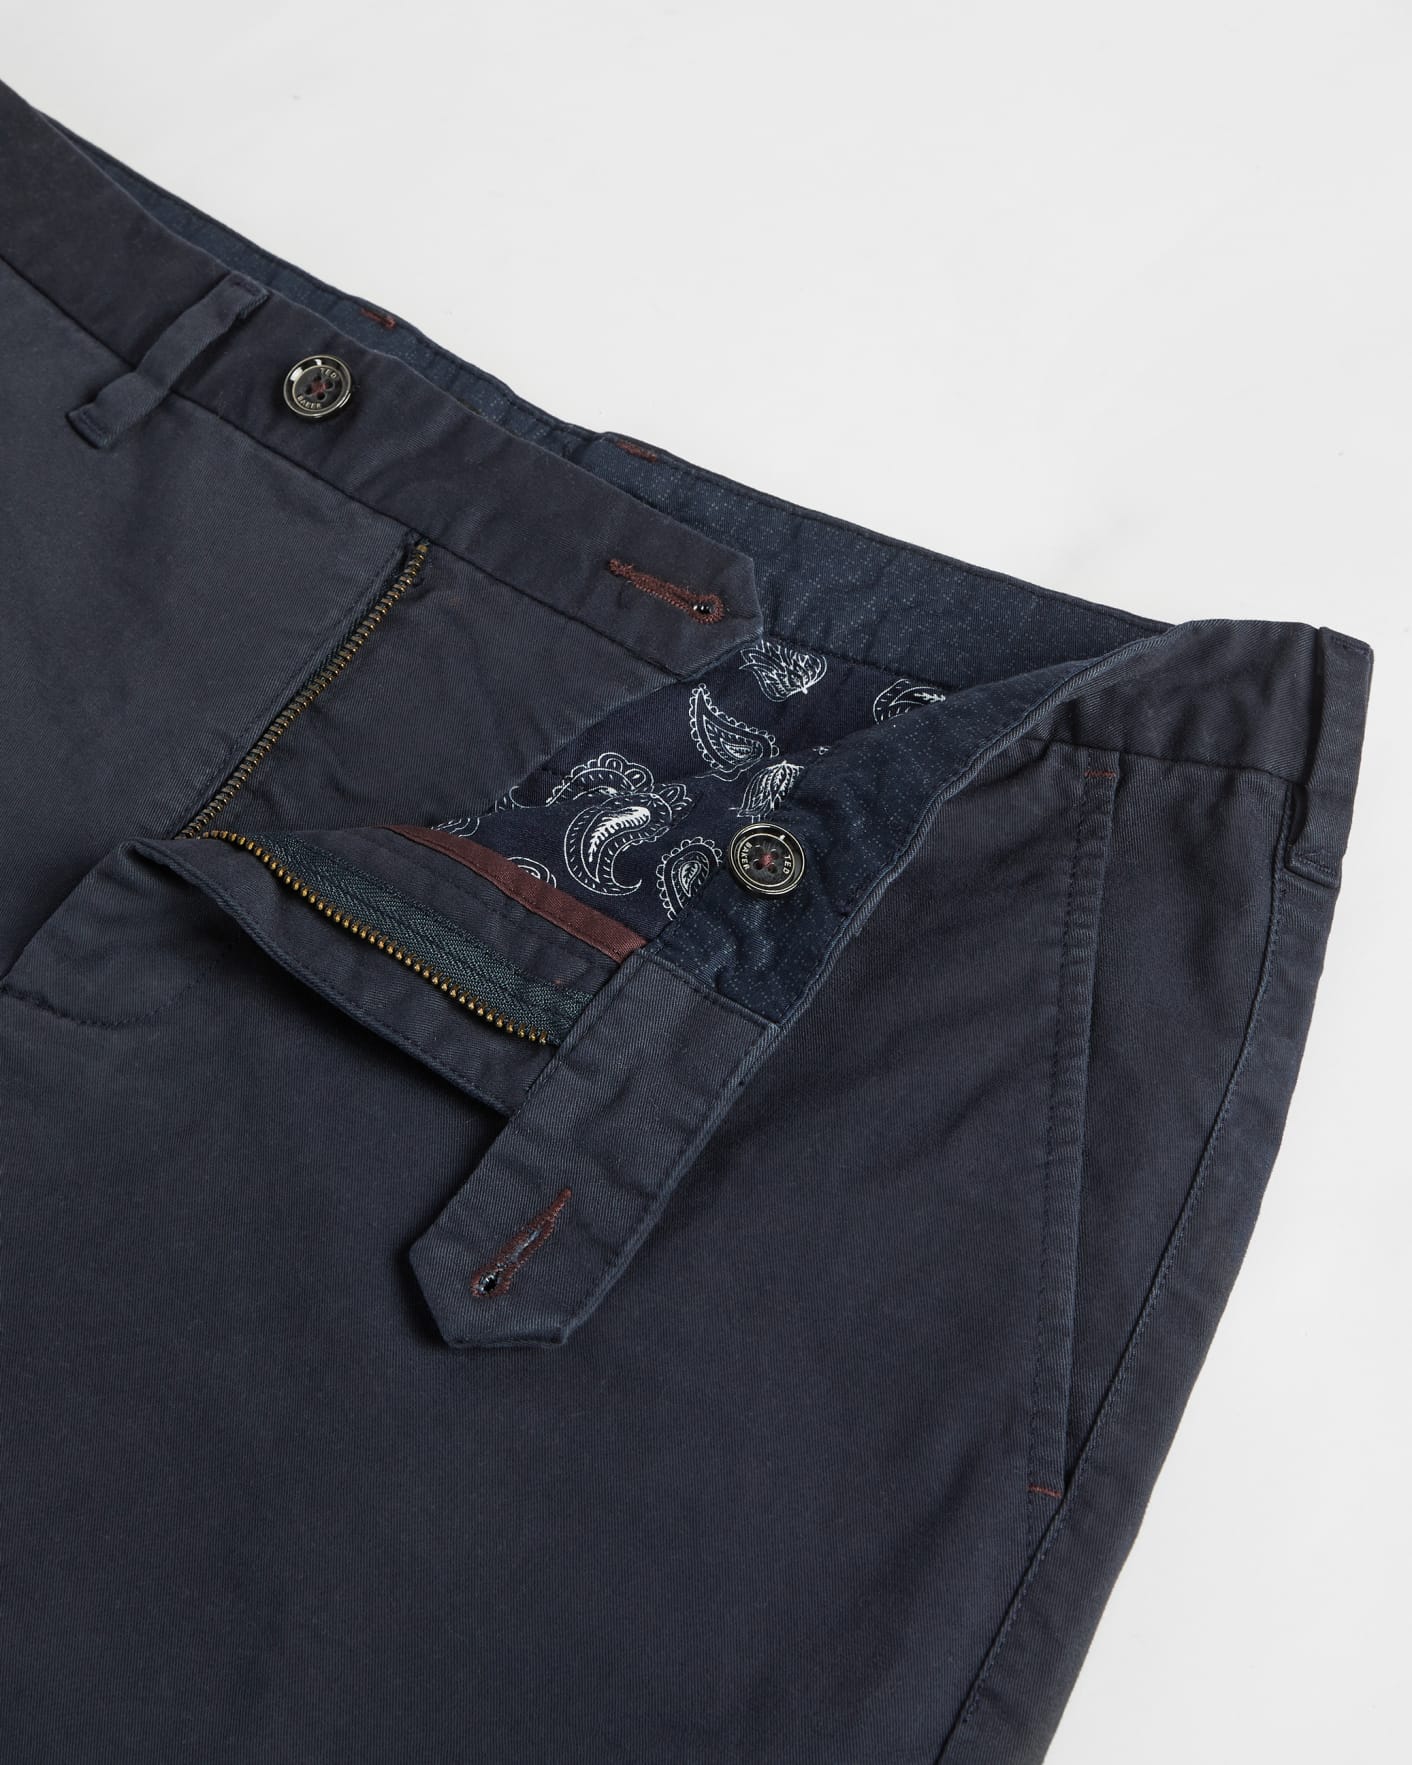 NAVY Cotton chino shorts Ted Baker